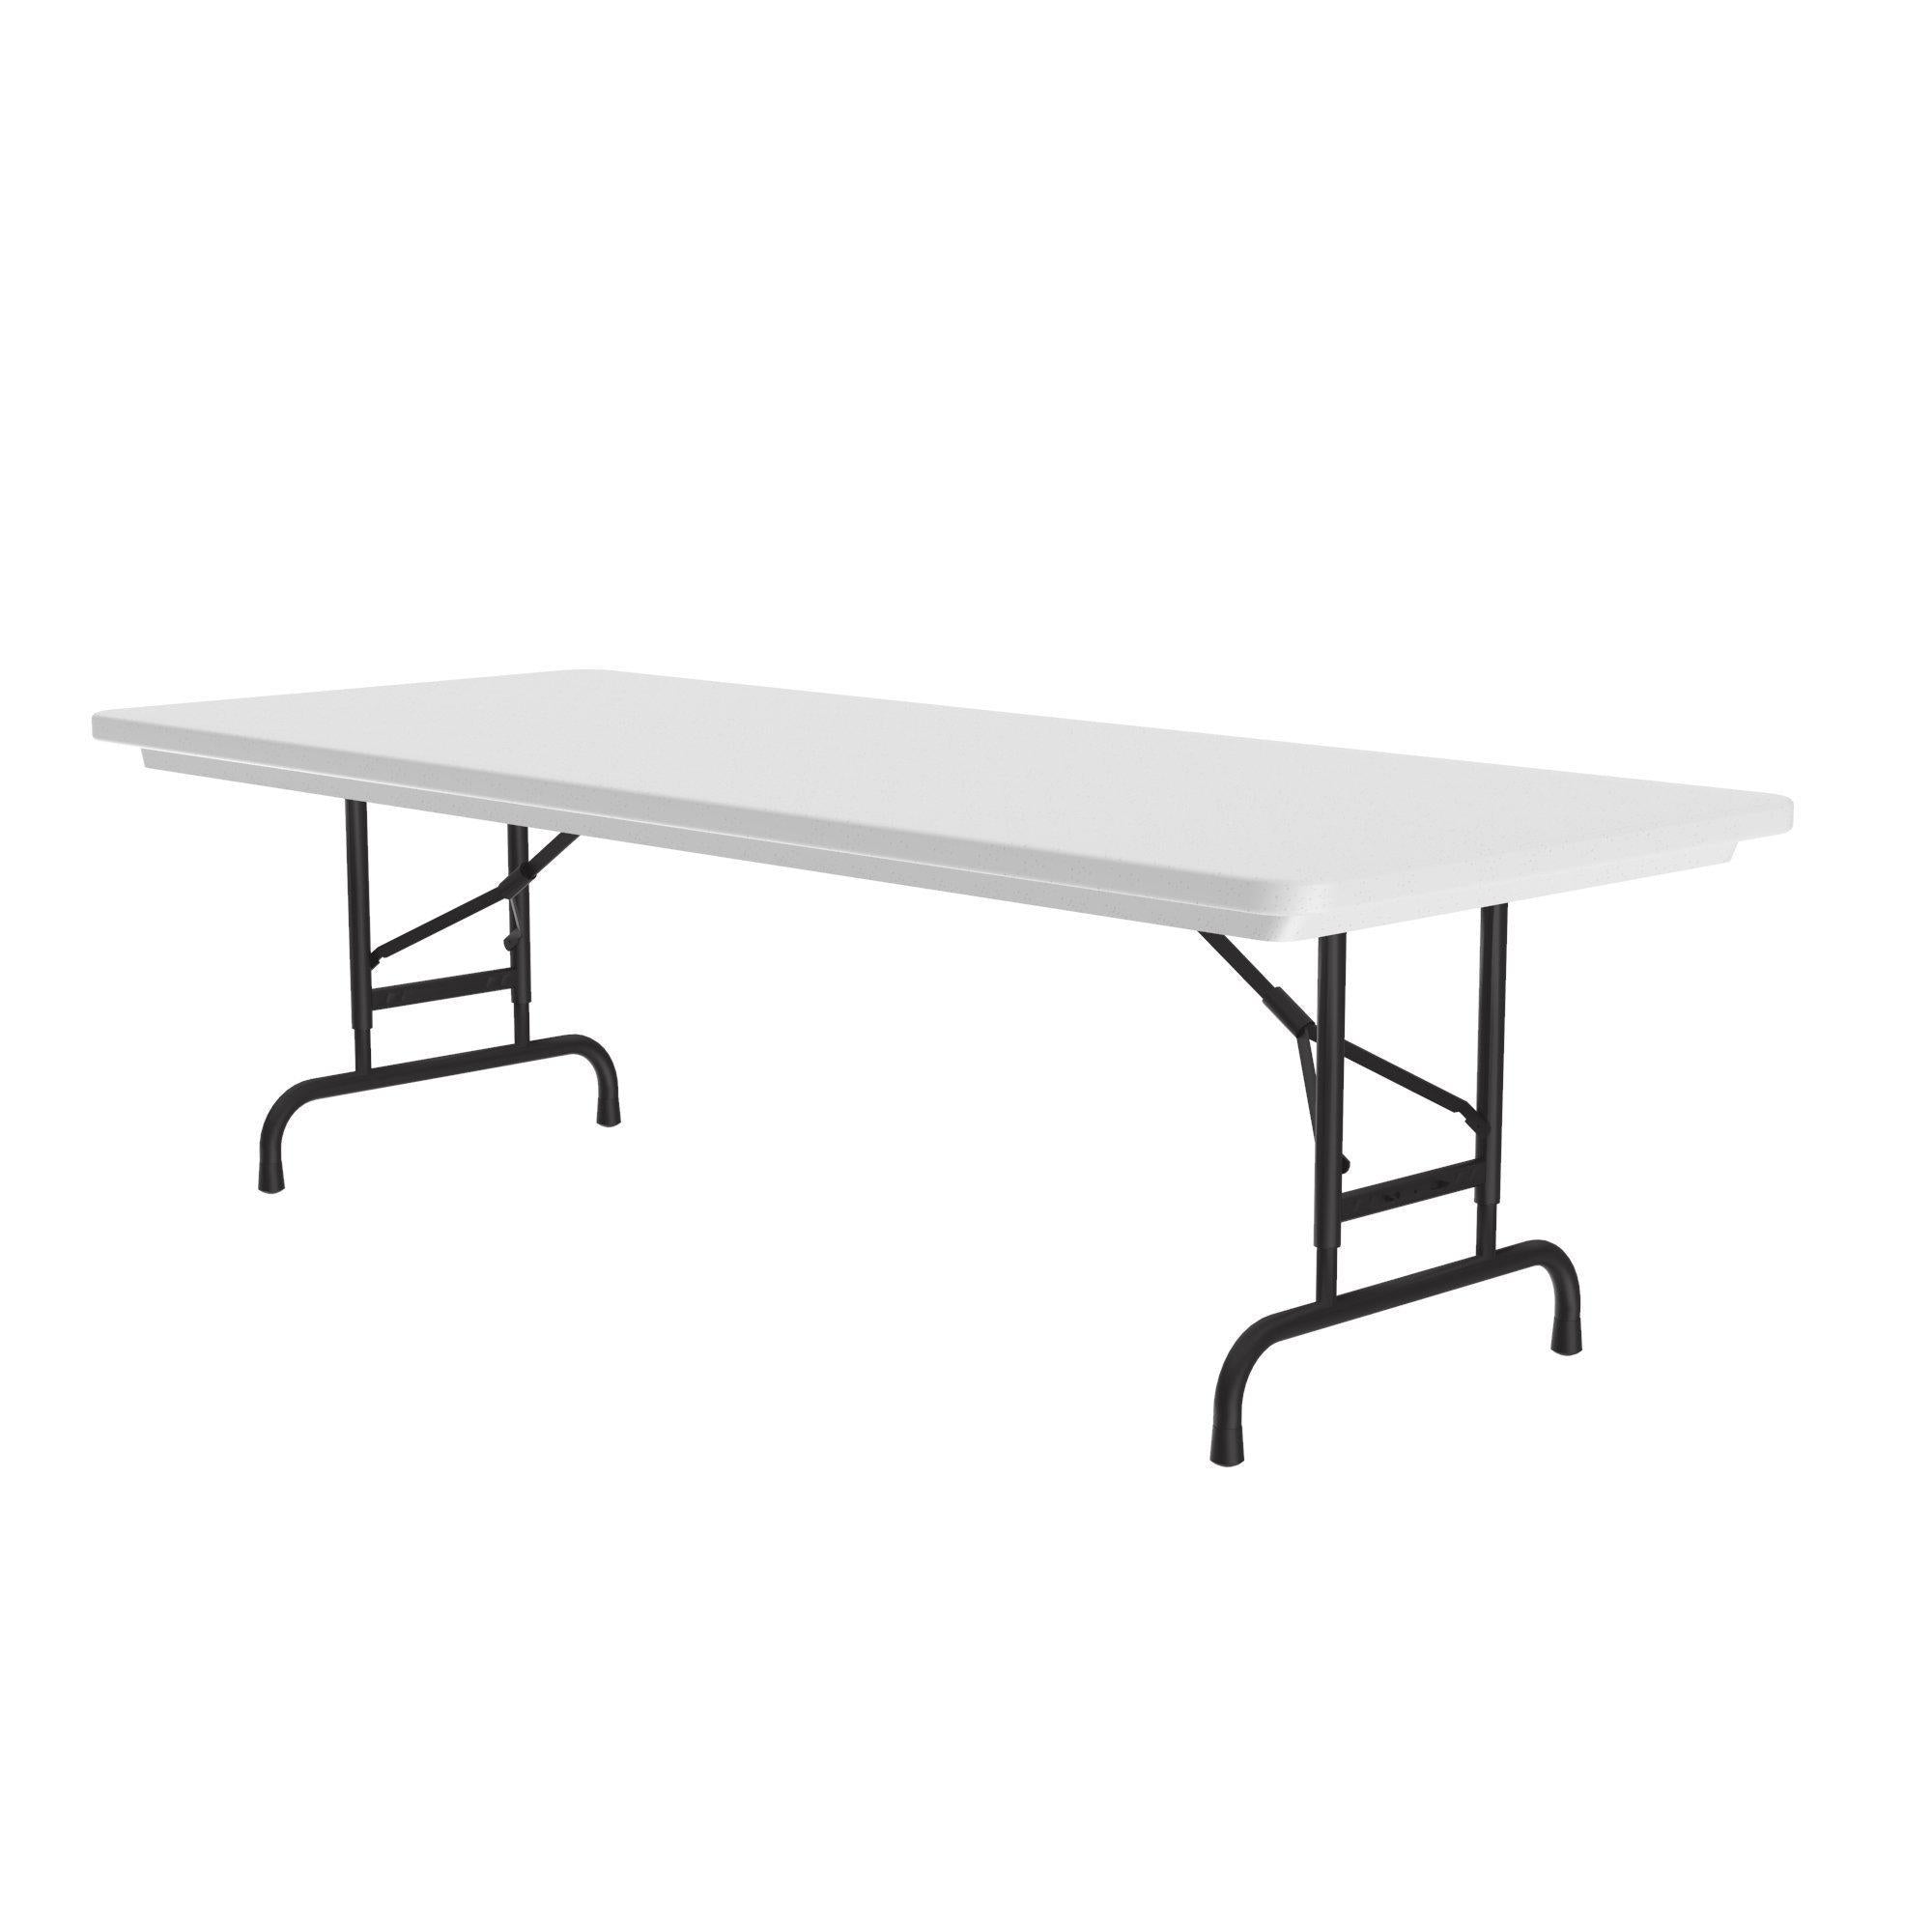 Heavy Duty Commercial Use Blow Molded Folding Table, Standard Colors, Adjustable Height, 30 x 72